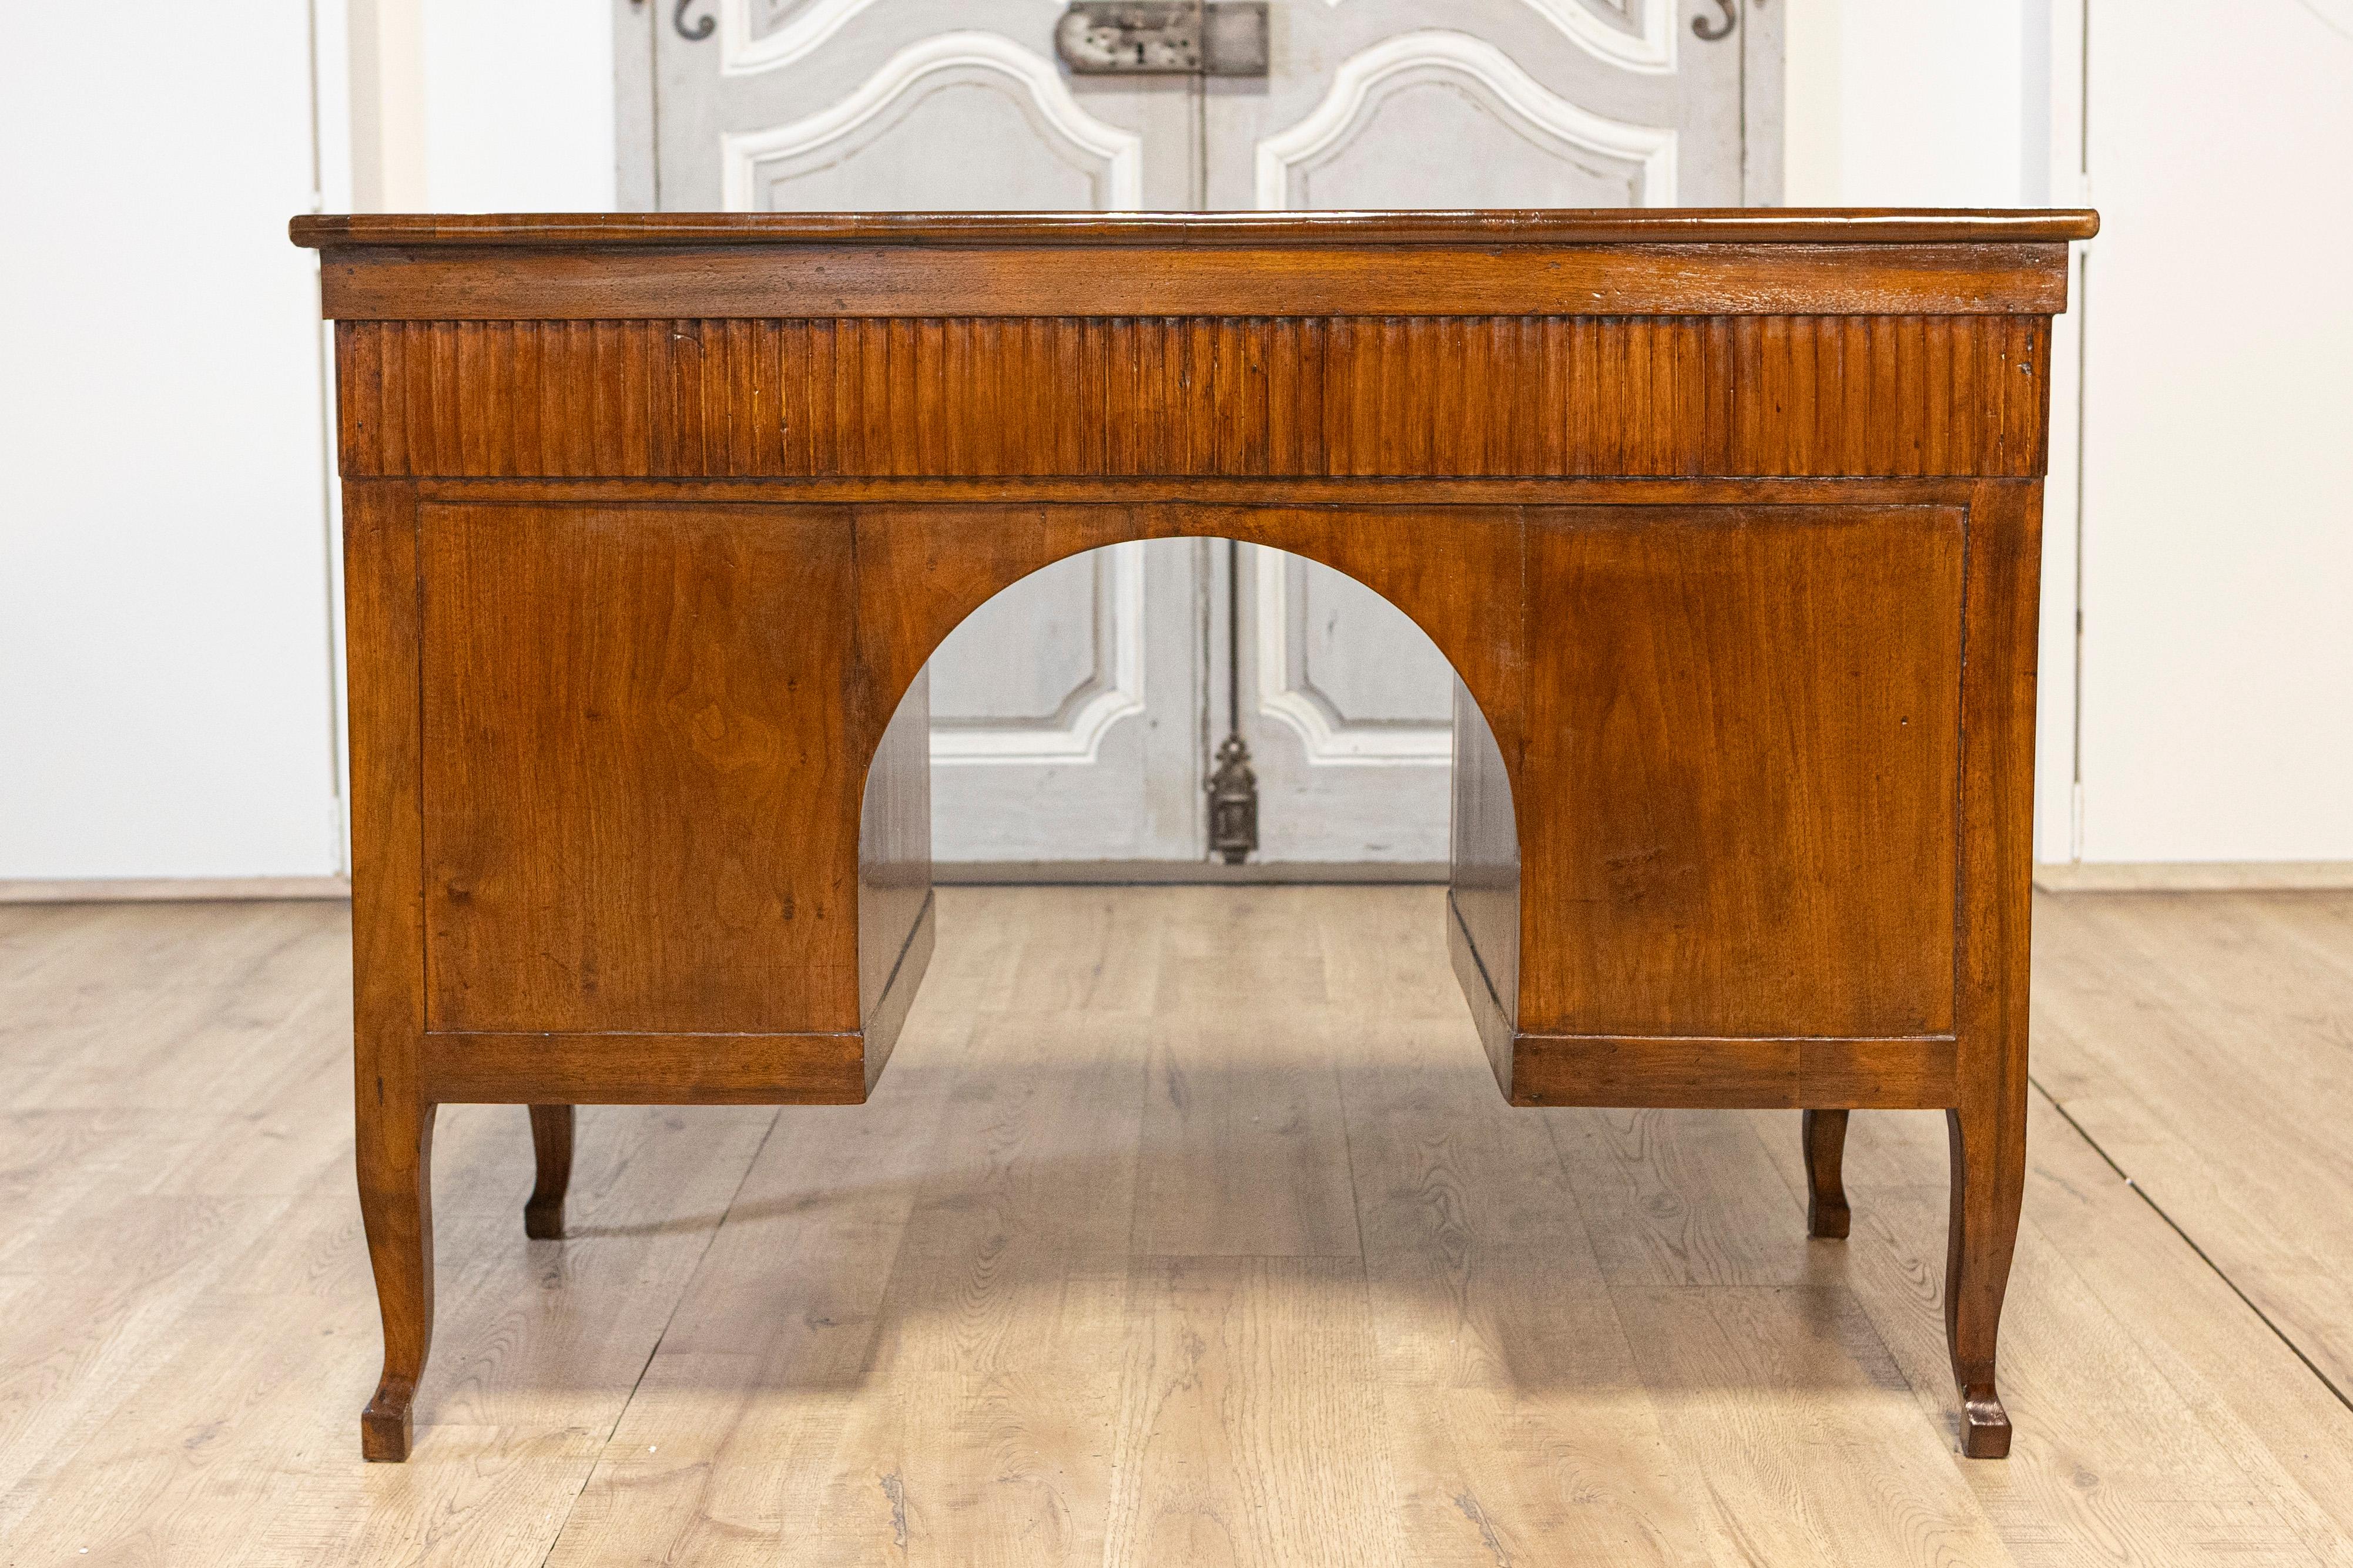 Italian 18th Century Walnut Desk with Carved Reeded Apron, Drawers and Doors For Sale 6